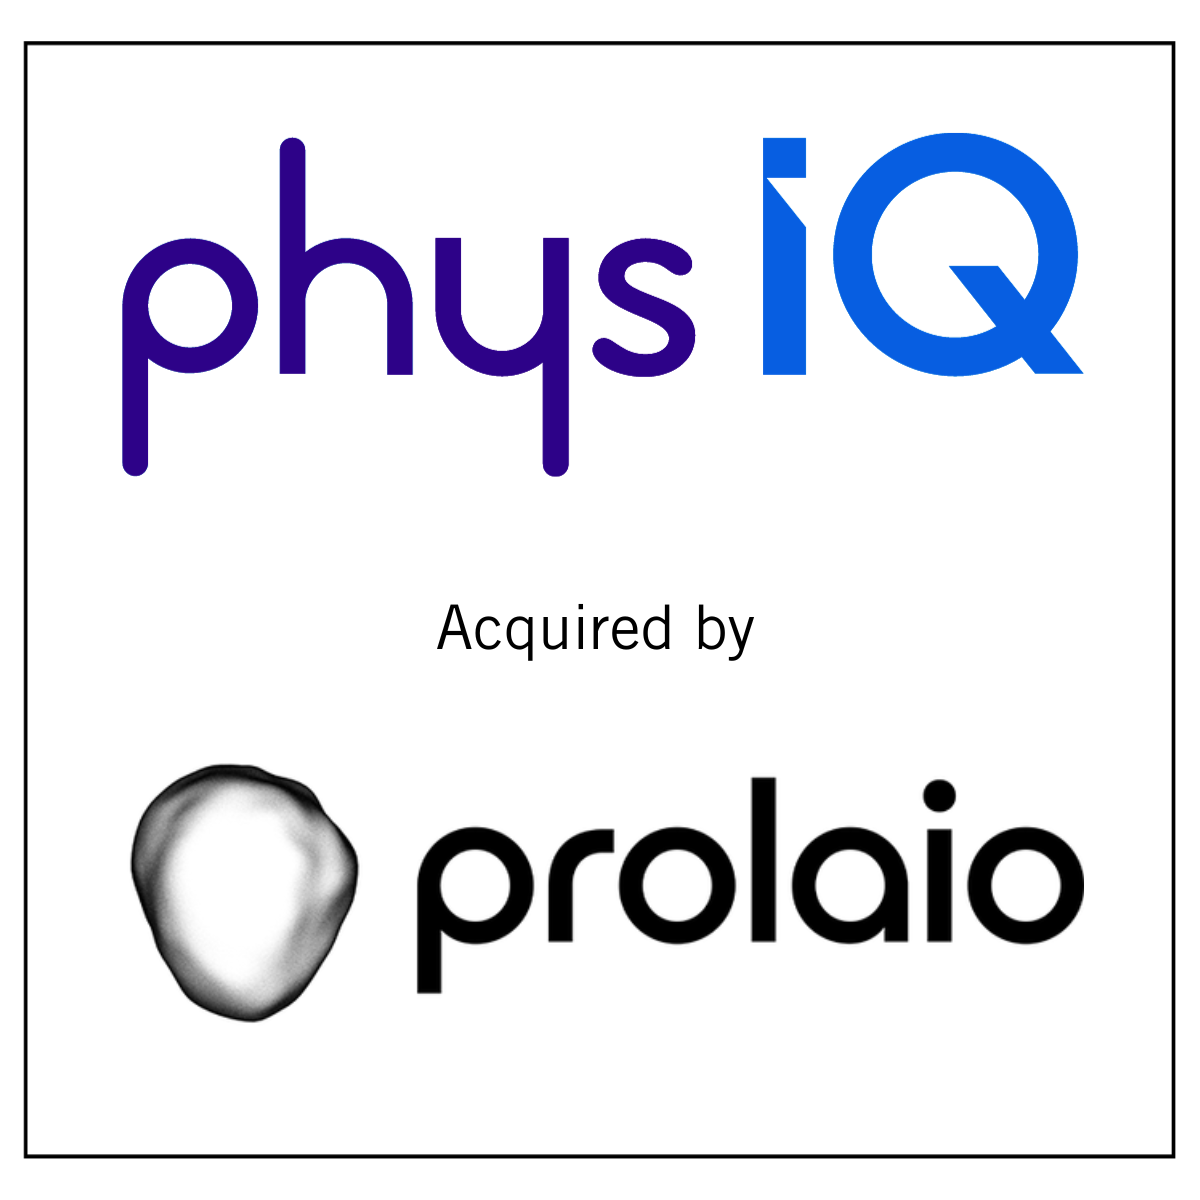 physIQ Acquired by Prolaio to Enhance its Next-Gen Connected Heart Care Technology for Clinical Care and Research